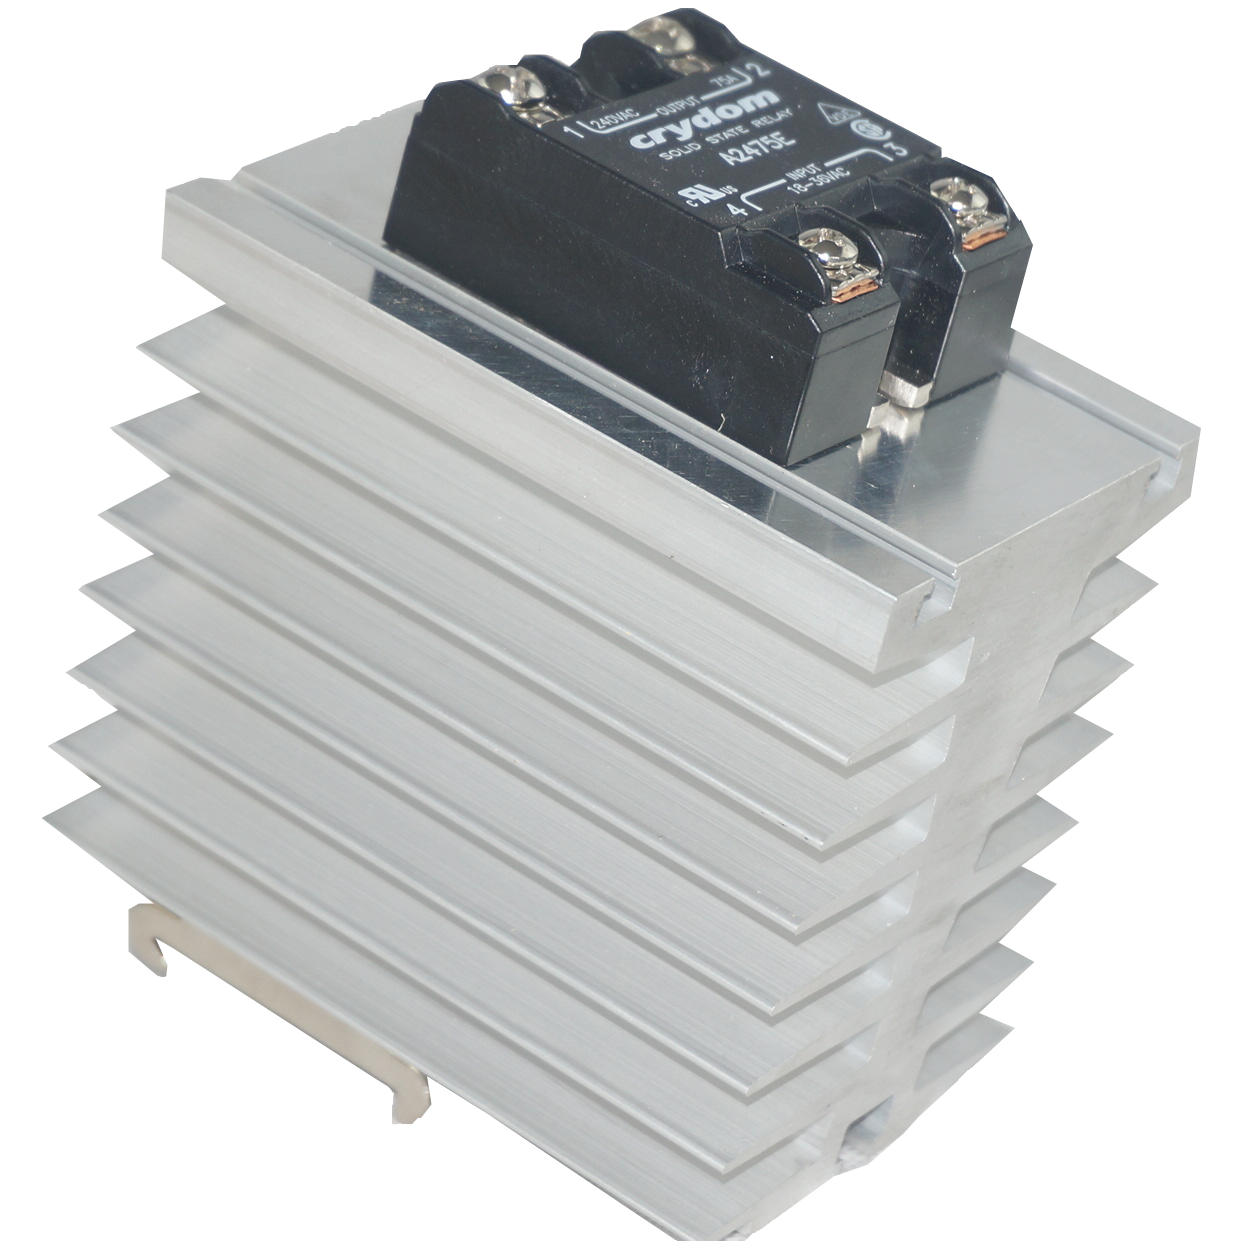 GFIN/100M-DR + HD4875-10, Din Rail Mount Solid State Relay with Heatsink, Random Crossing, 4-32VDC Control Input, 48-530VAC Output, 68 Amps @ 40 Deg C ambient